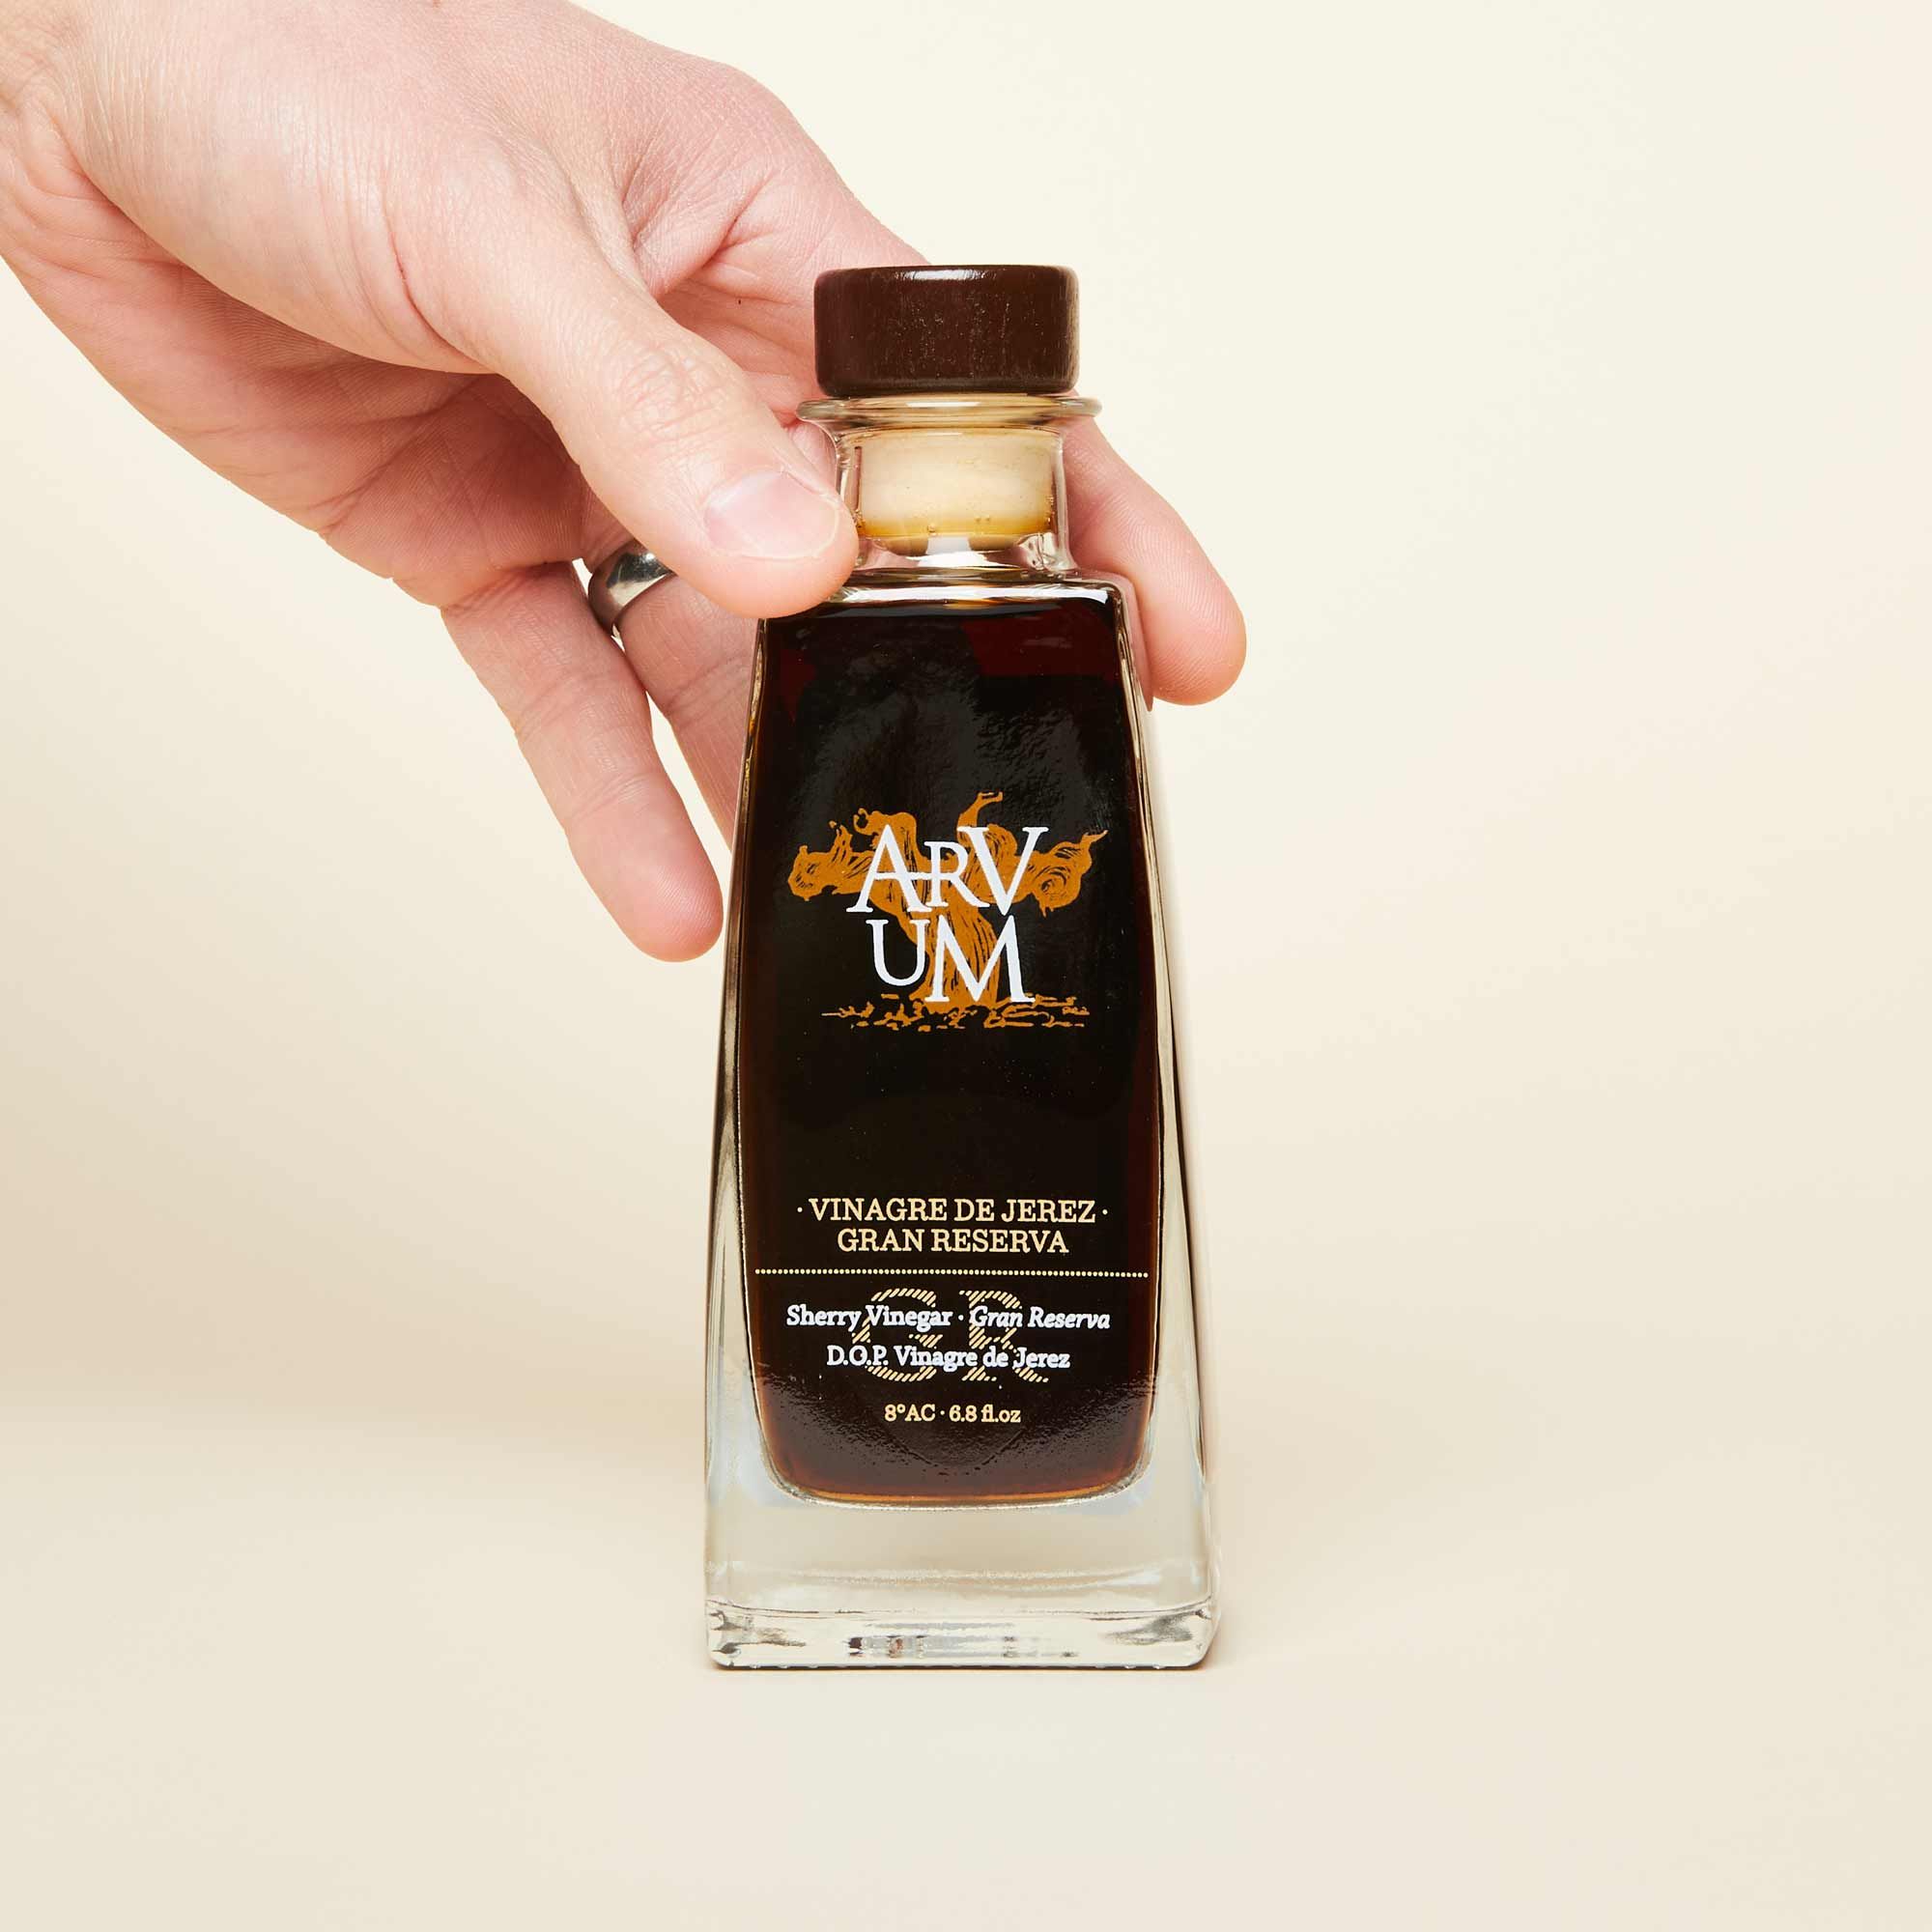 A hand touches a bottle of sherry vinegar, which is dark brown.